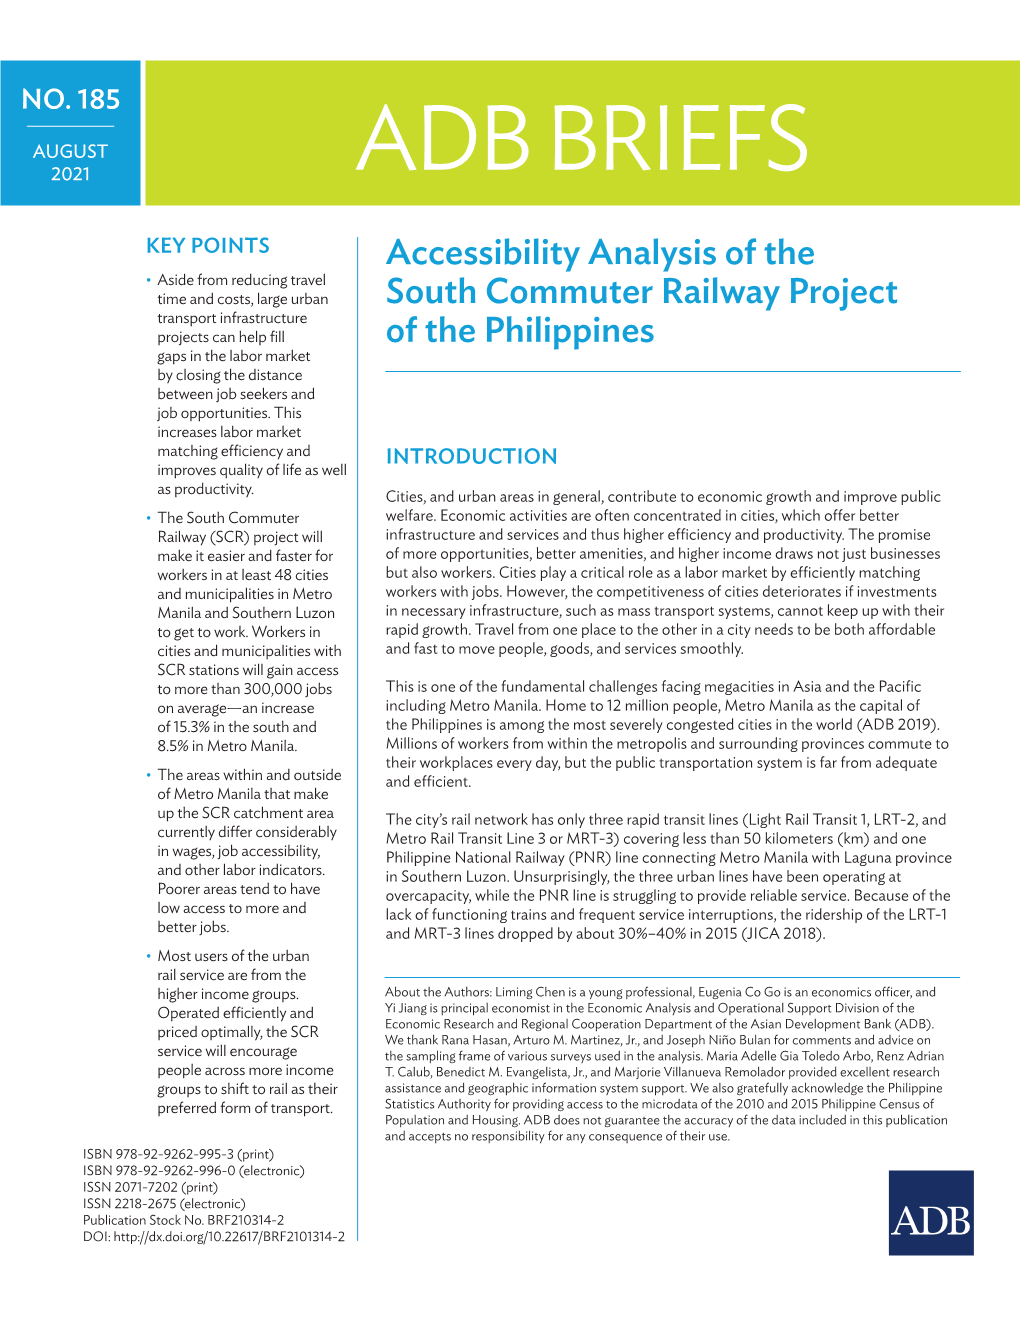 Accessibility Analysis of the South Commuter Railway Project of the Philippines